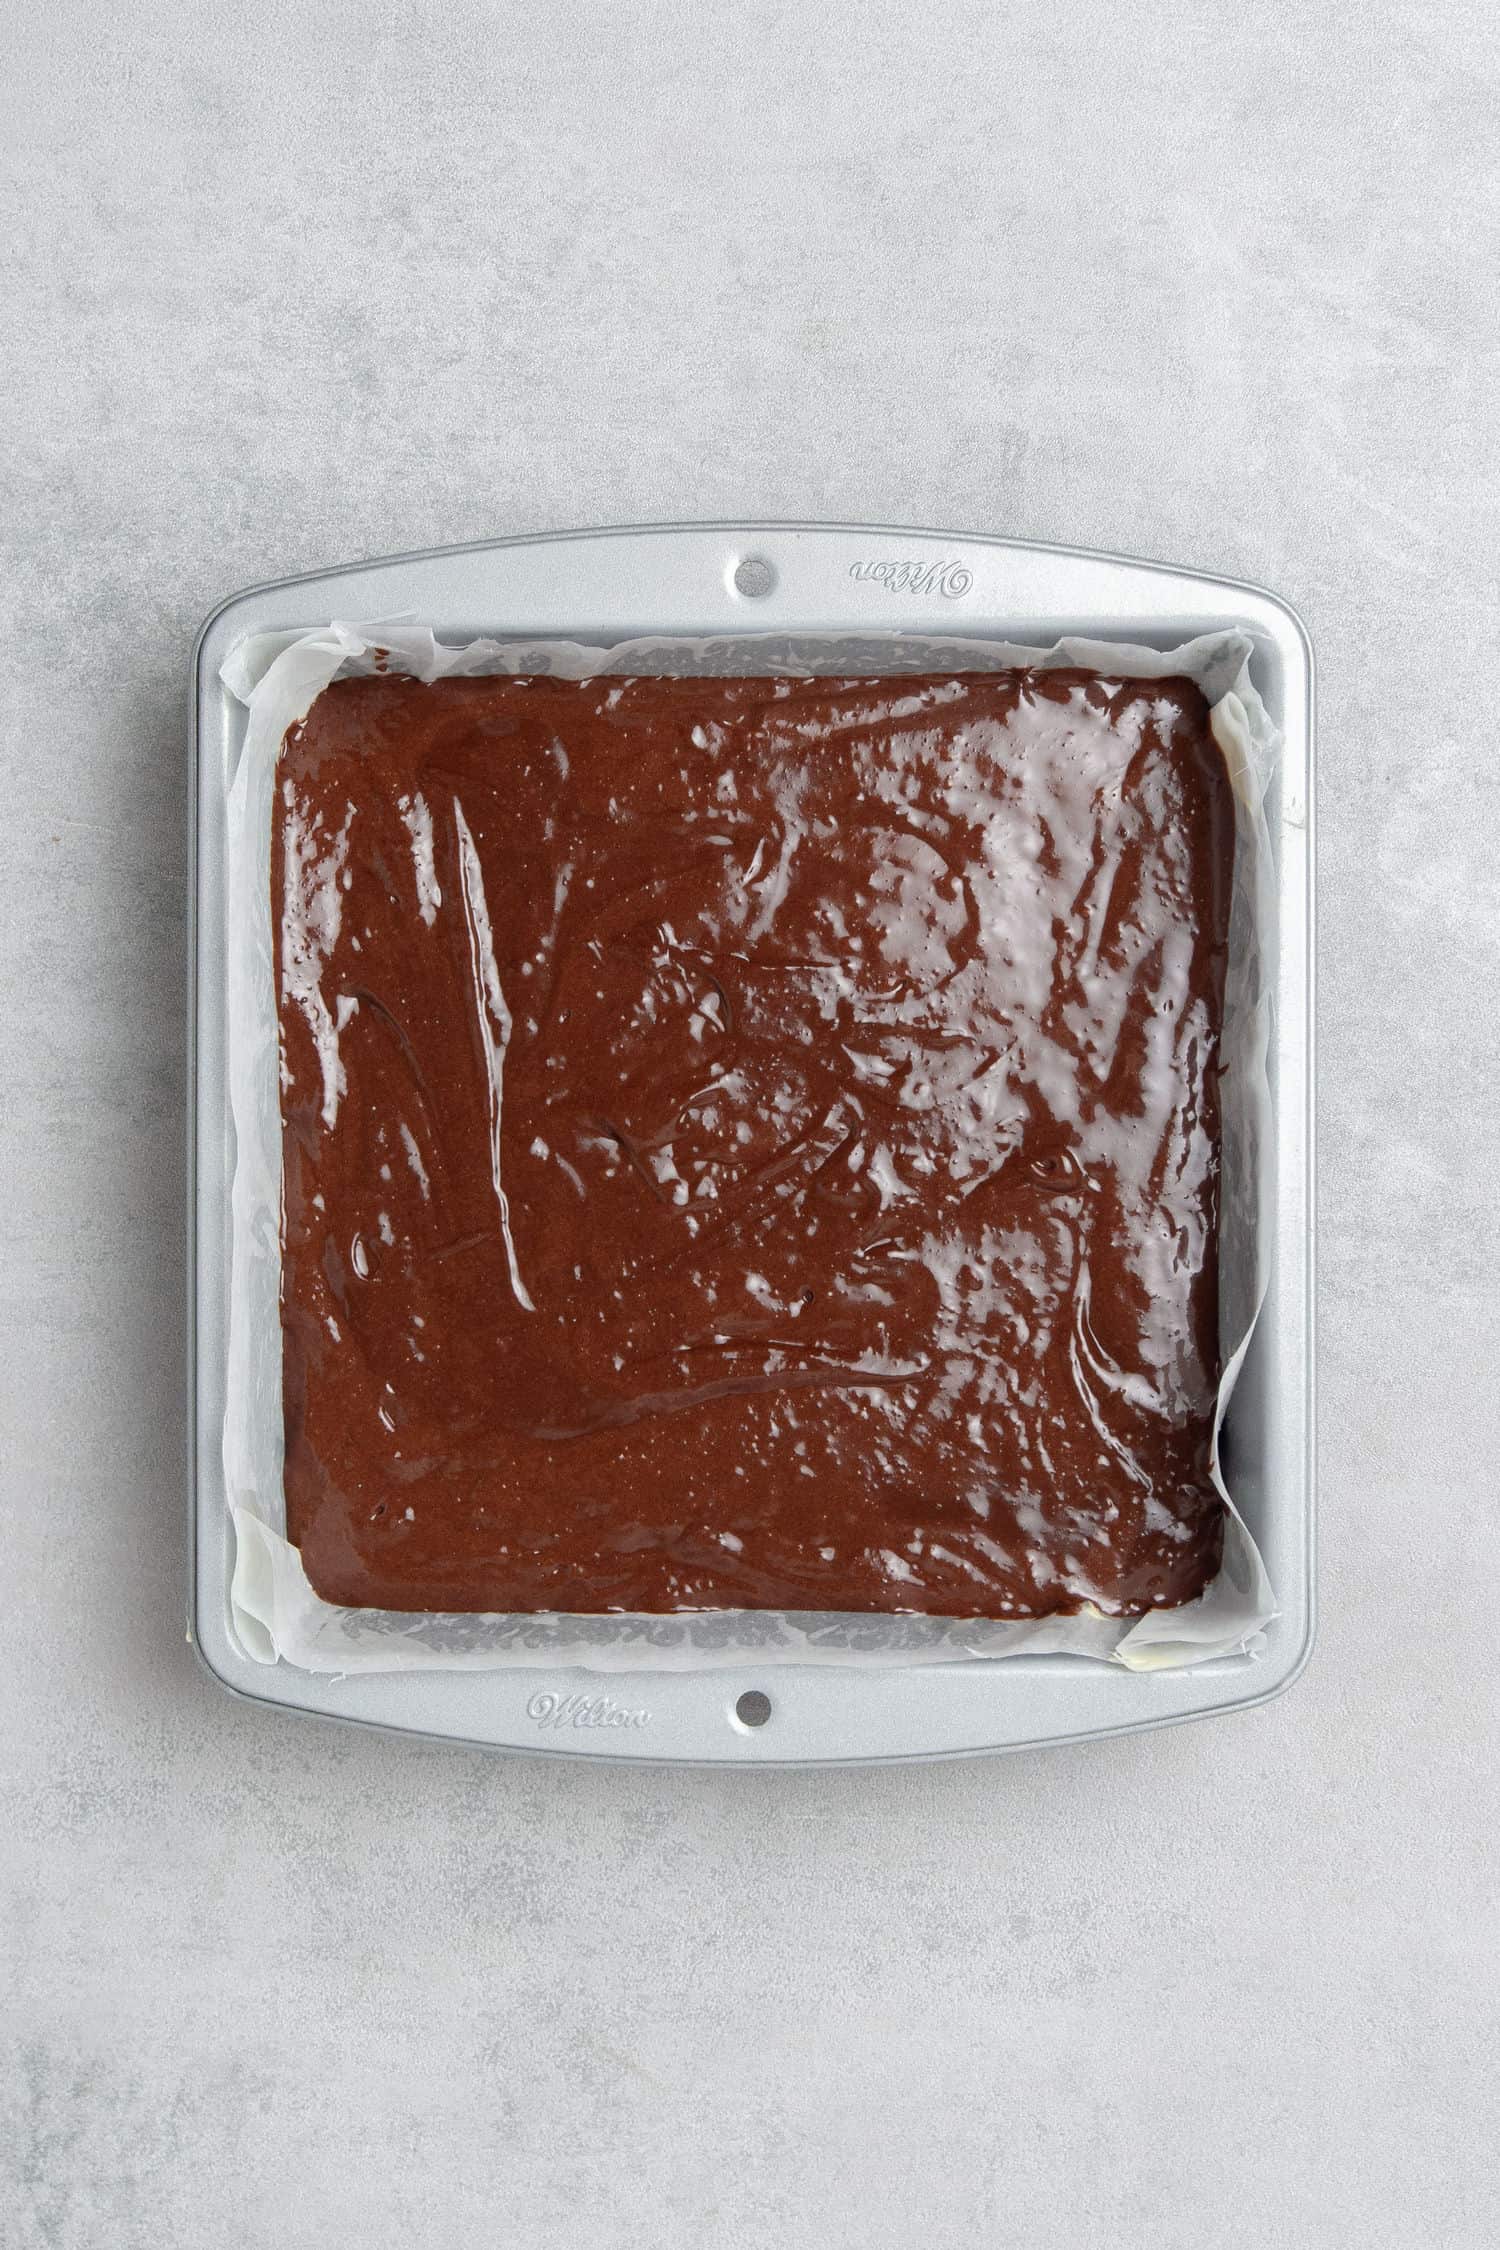 Coffee brownie in a baking tin before baking.